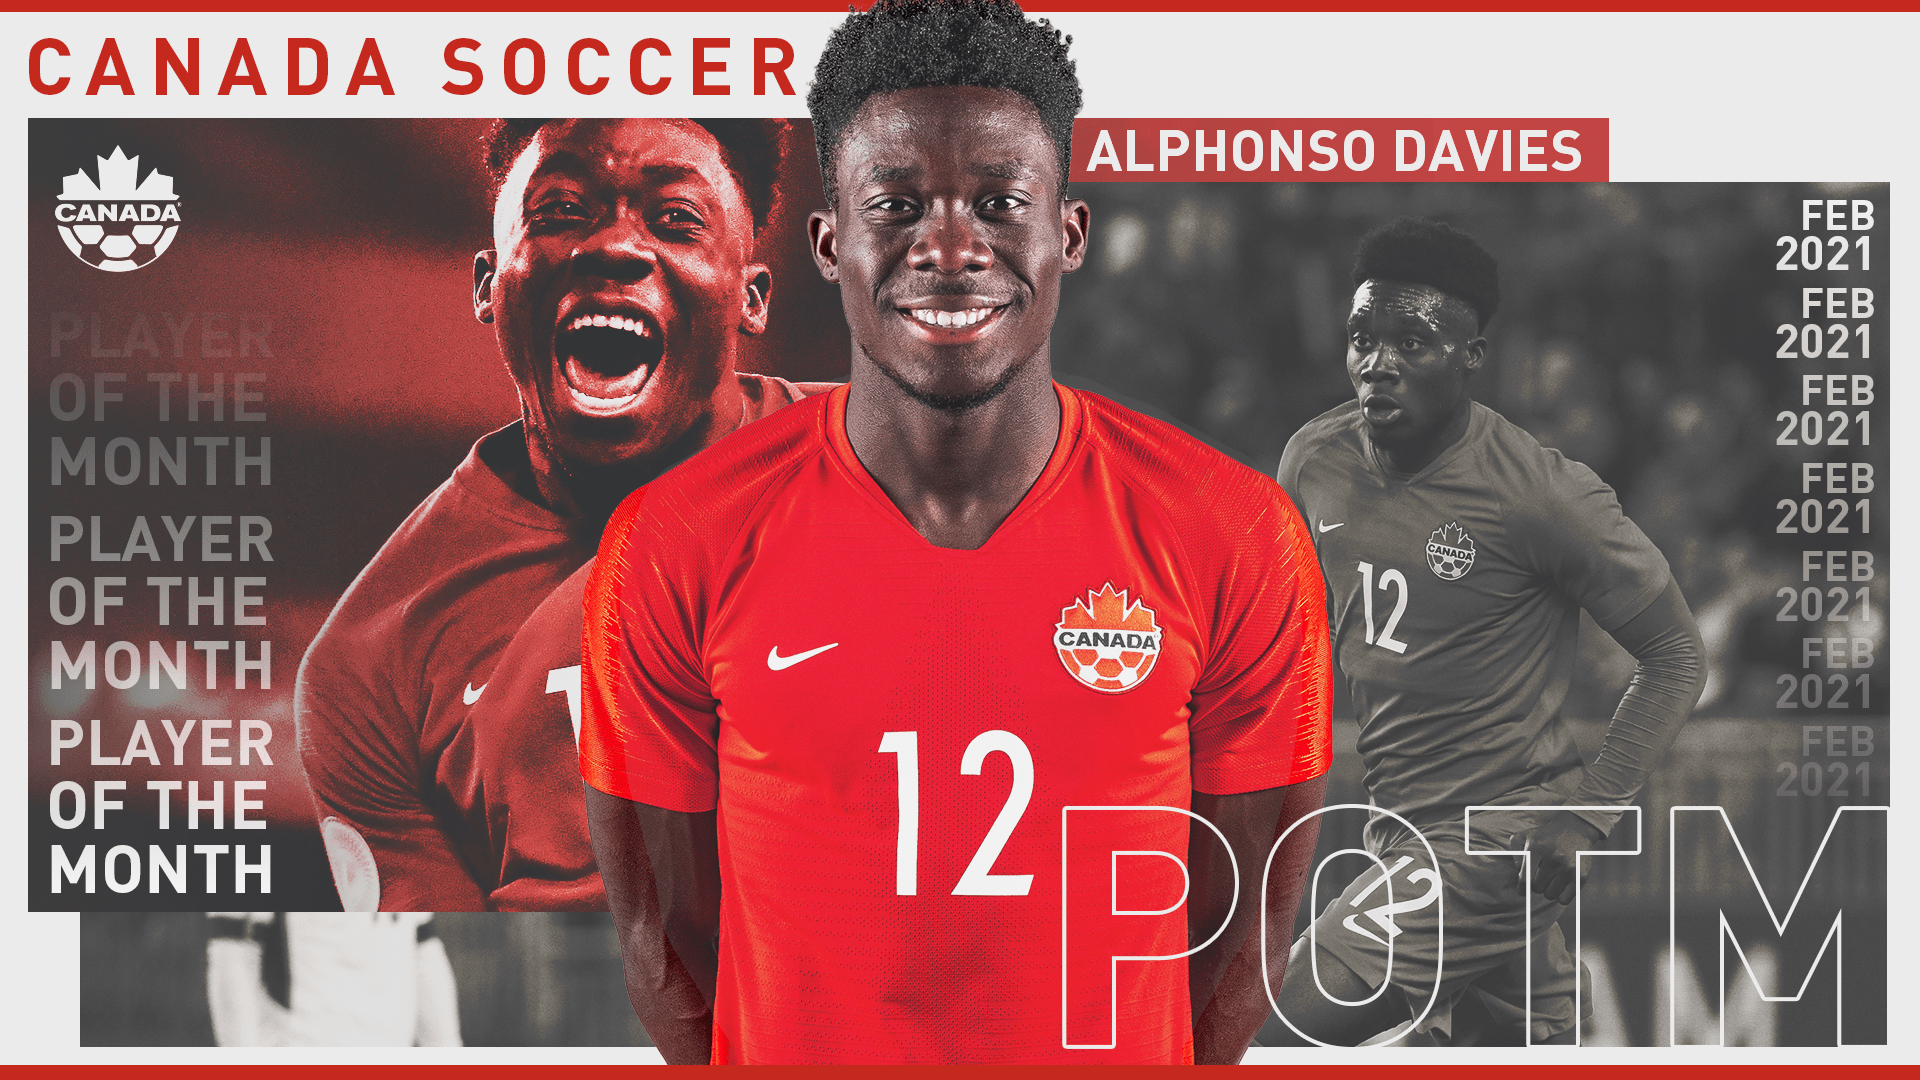 Alphonso Davies, Player of the Month